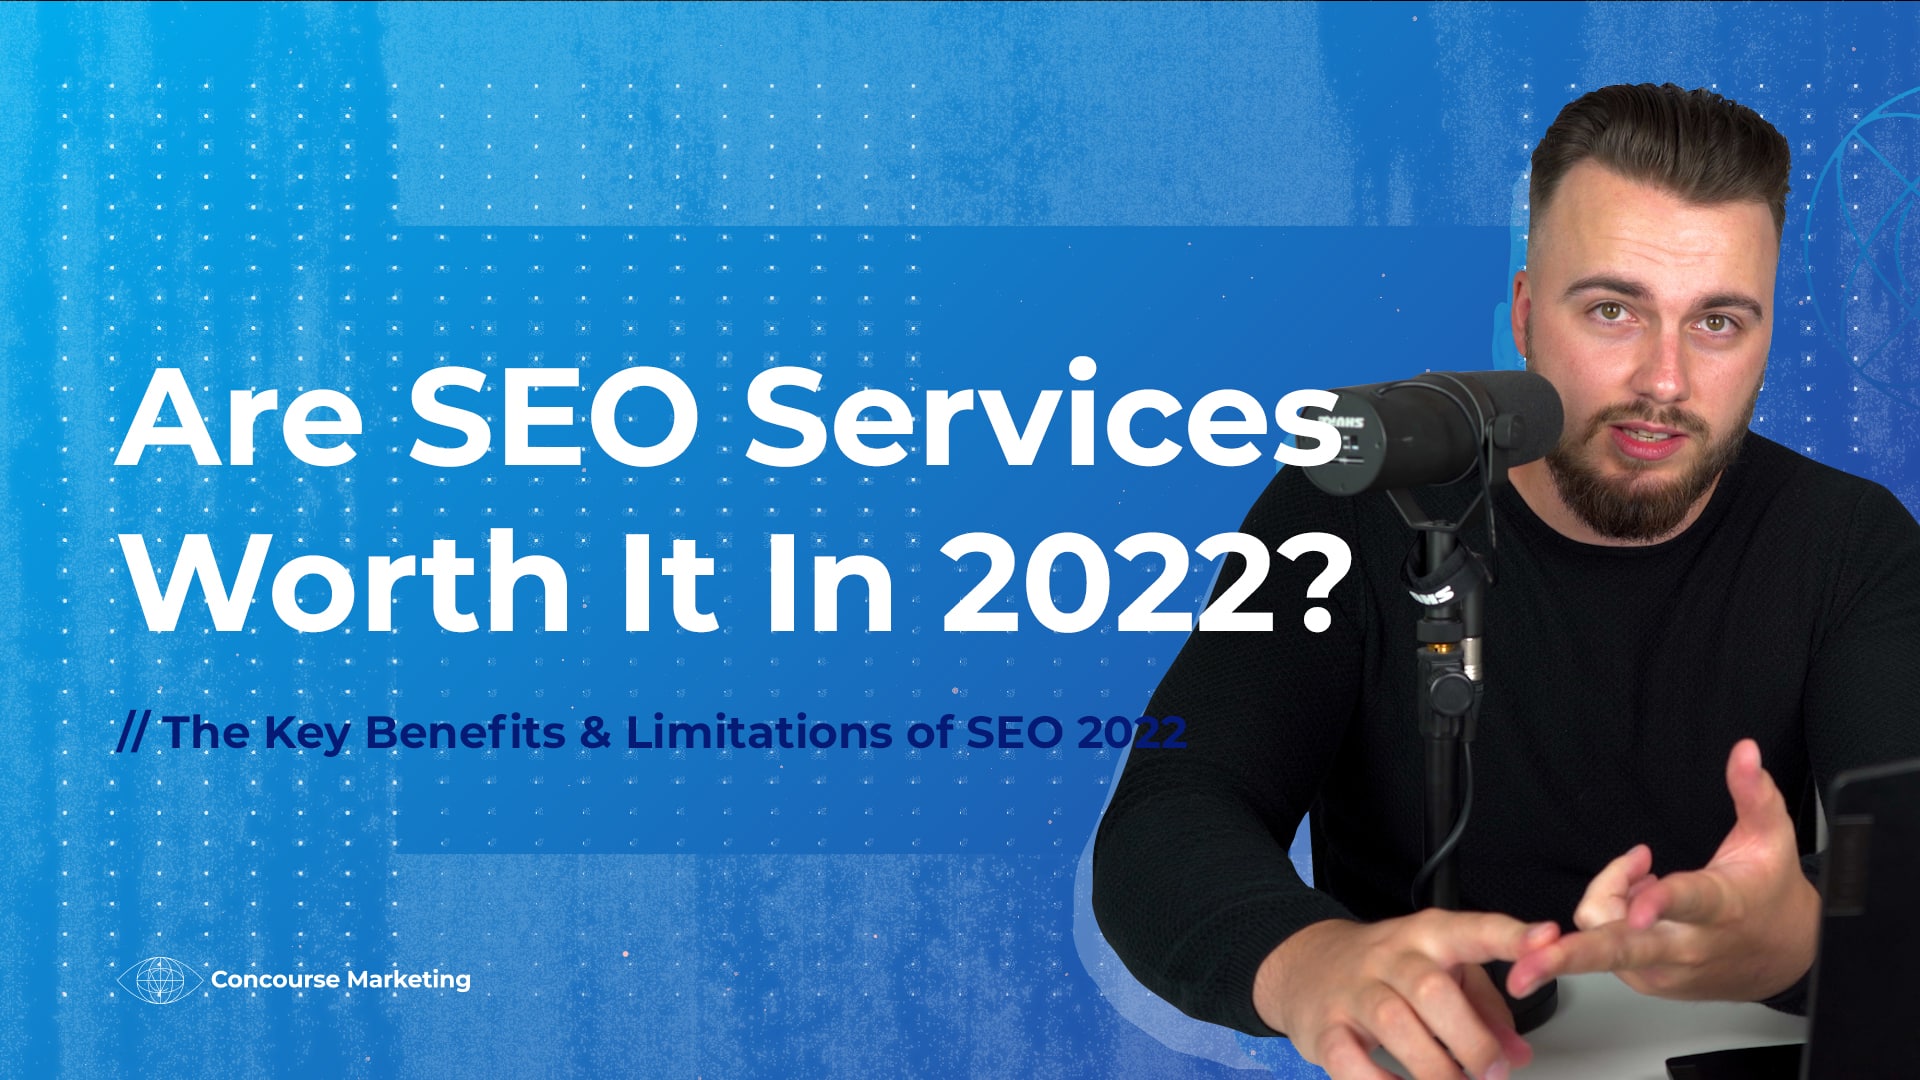 Are SEO Services Worth It In 2022?